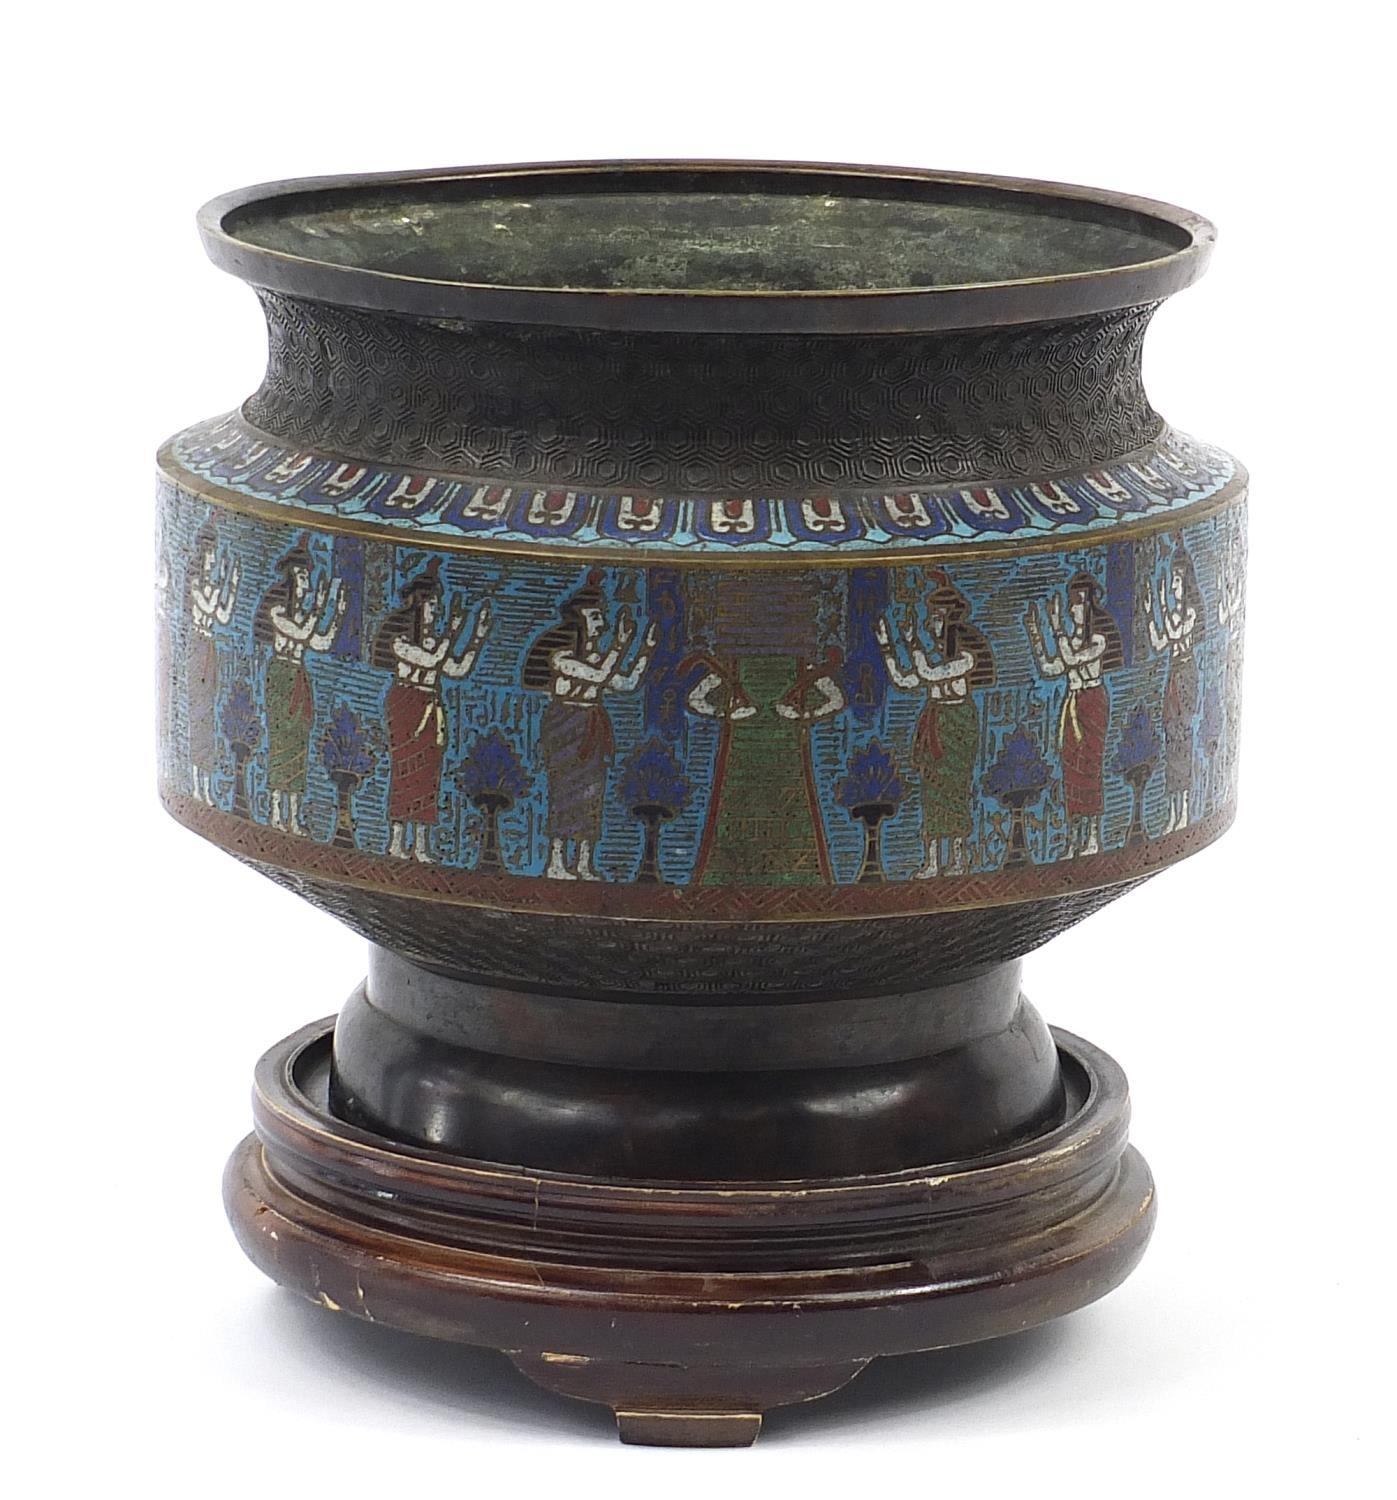 Large Chinese Egyptian revival cloisonné planter on carved hardwood stand, overall 30.5cm high x - Image 3 of 8